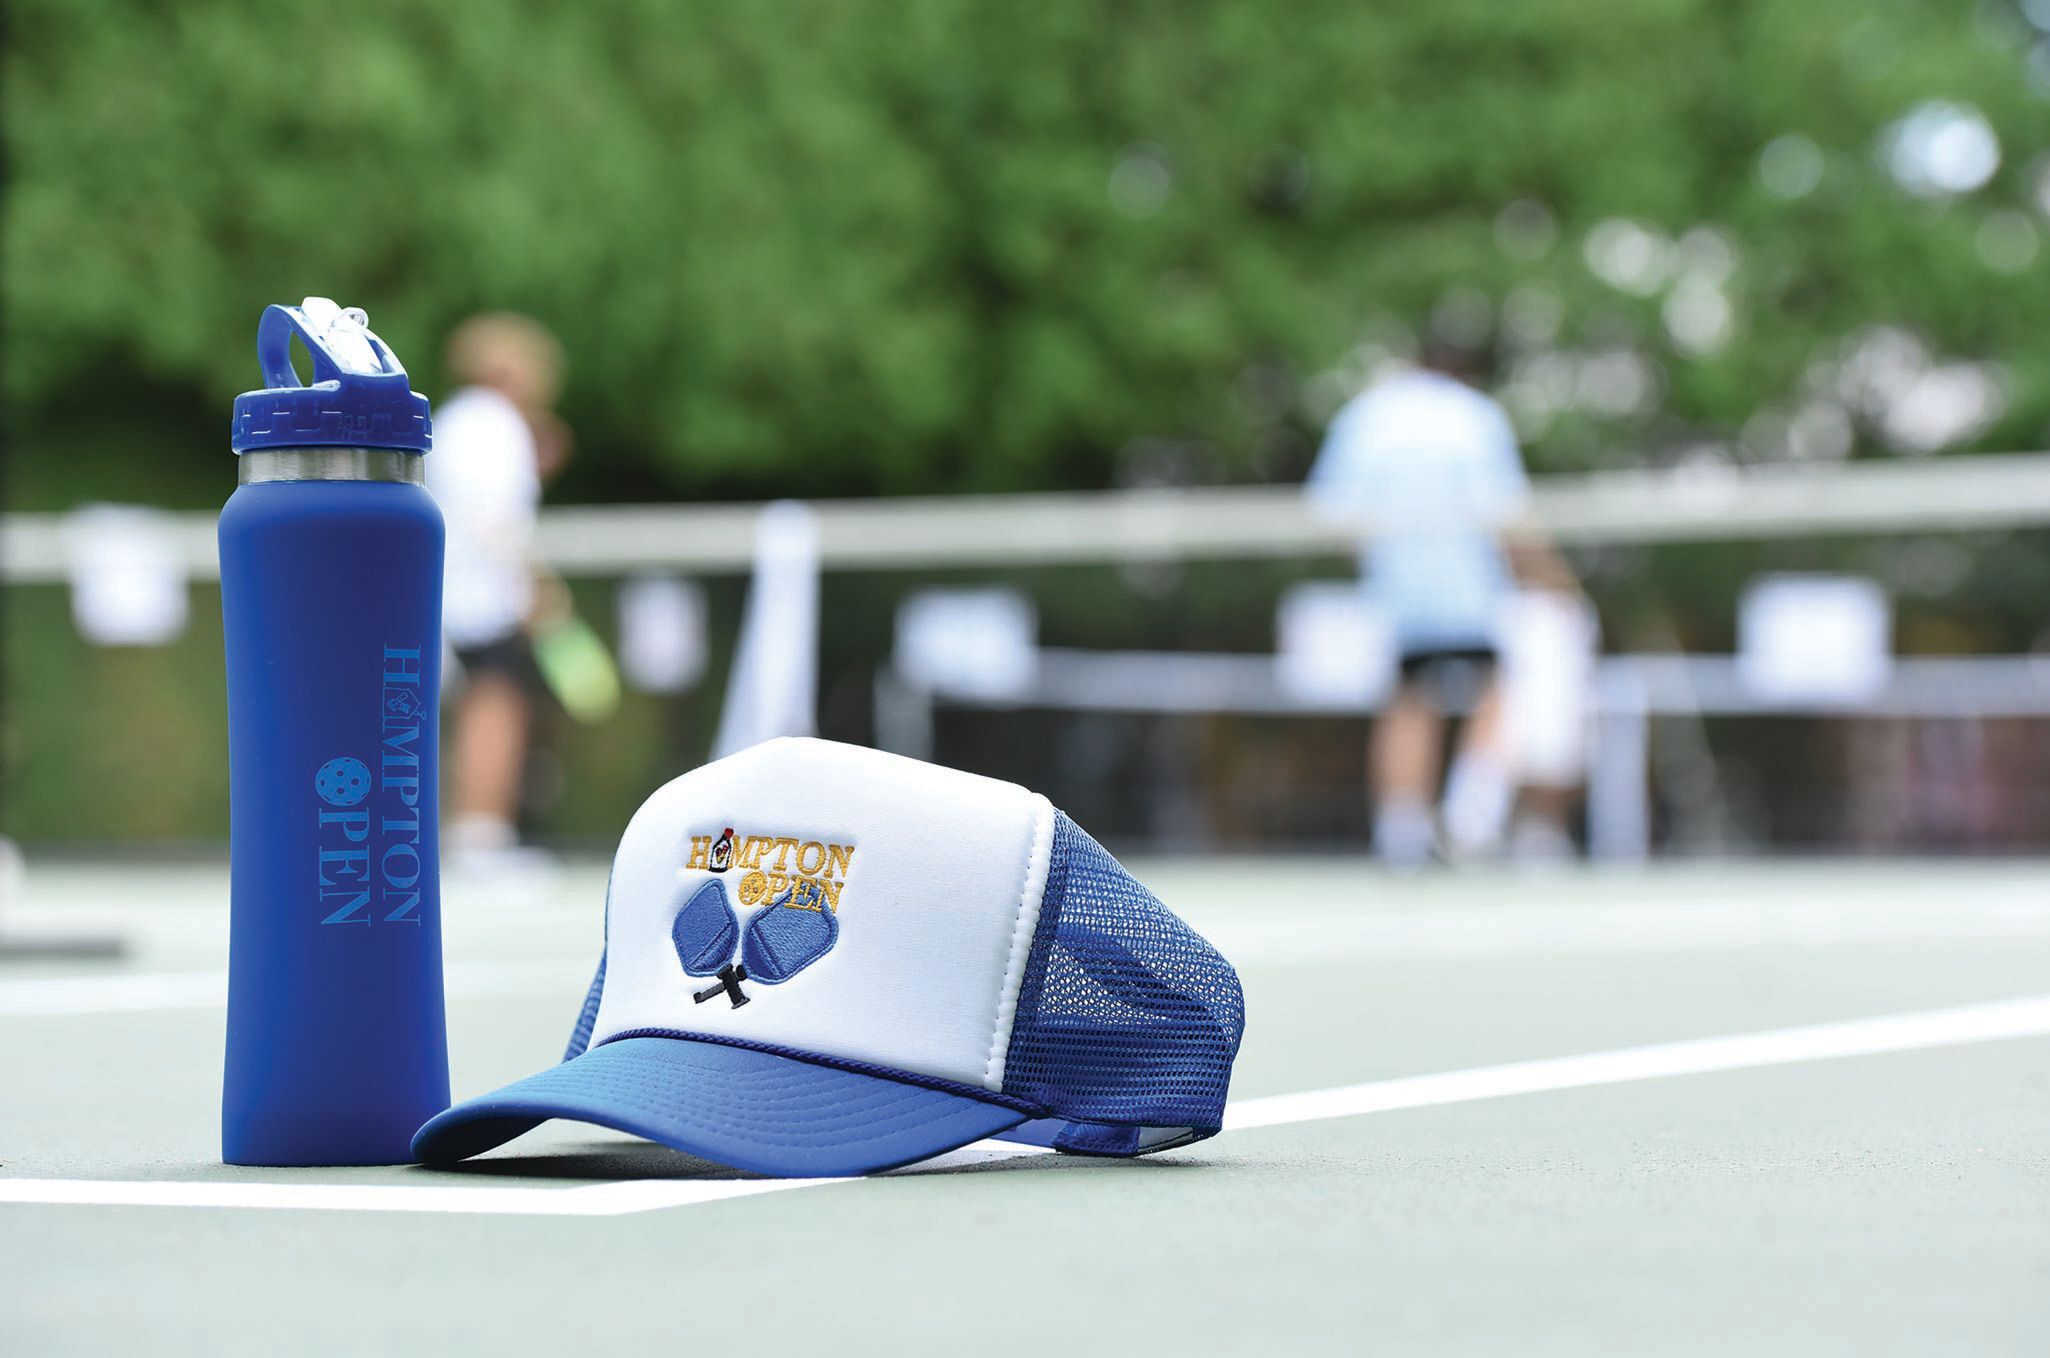 Free hats, water bottles, bags and more will be available during the tournament, and players can pick up customized paddles at the Friday kickoff event before Sunday’s tournament PHOTO BY ROBERTO MATTEO